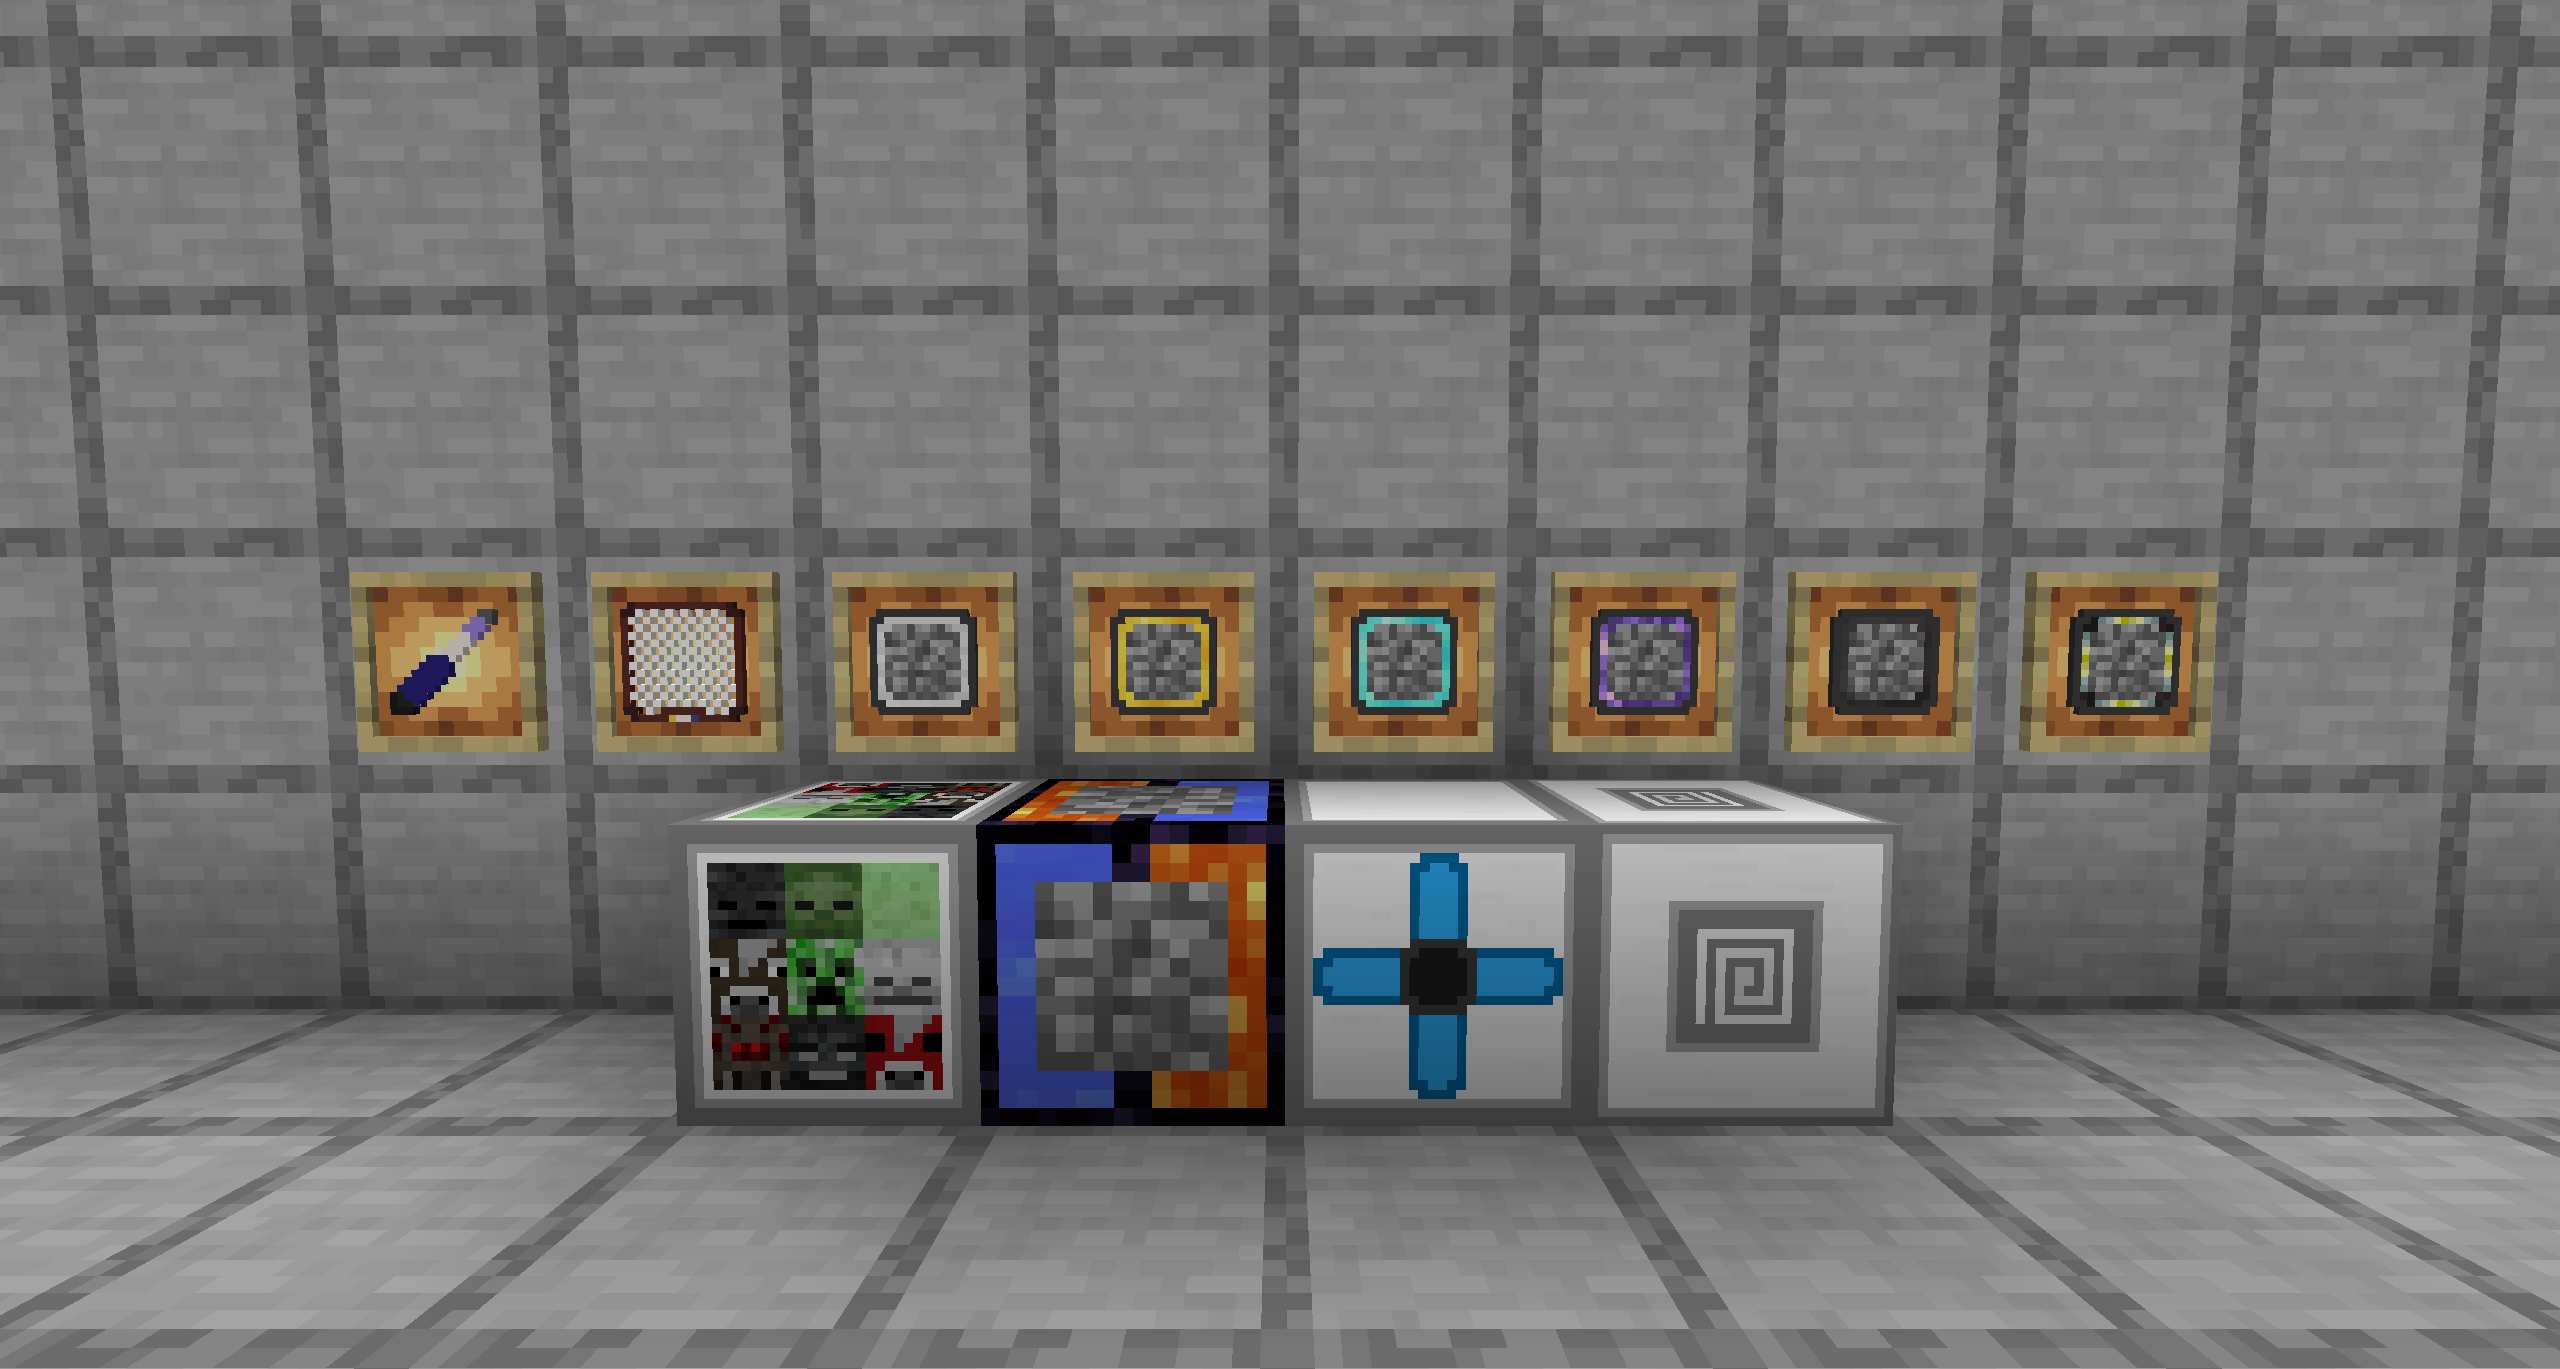 All blocks and items